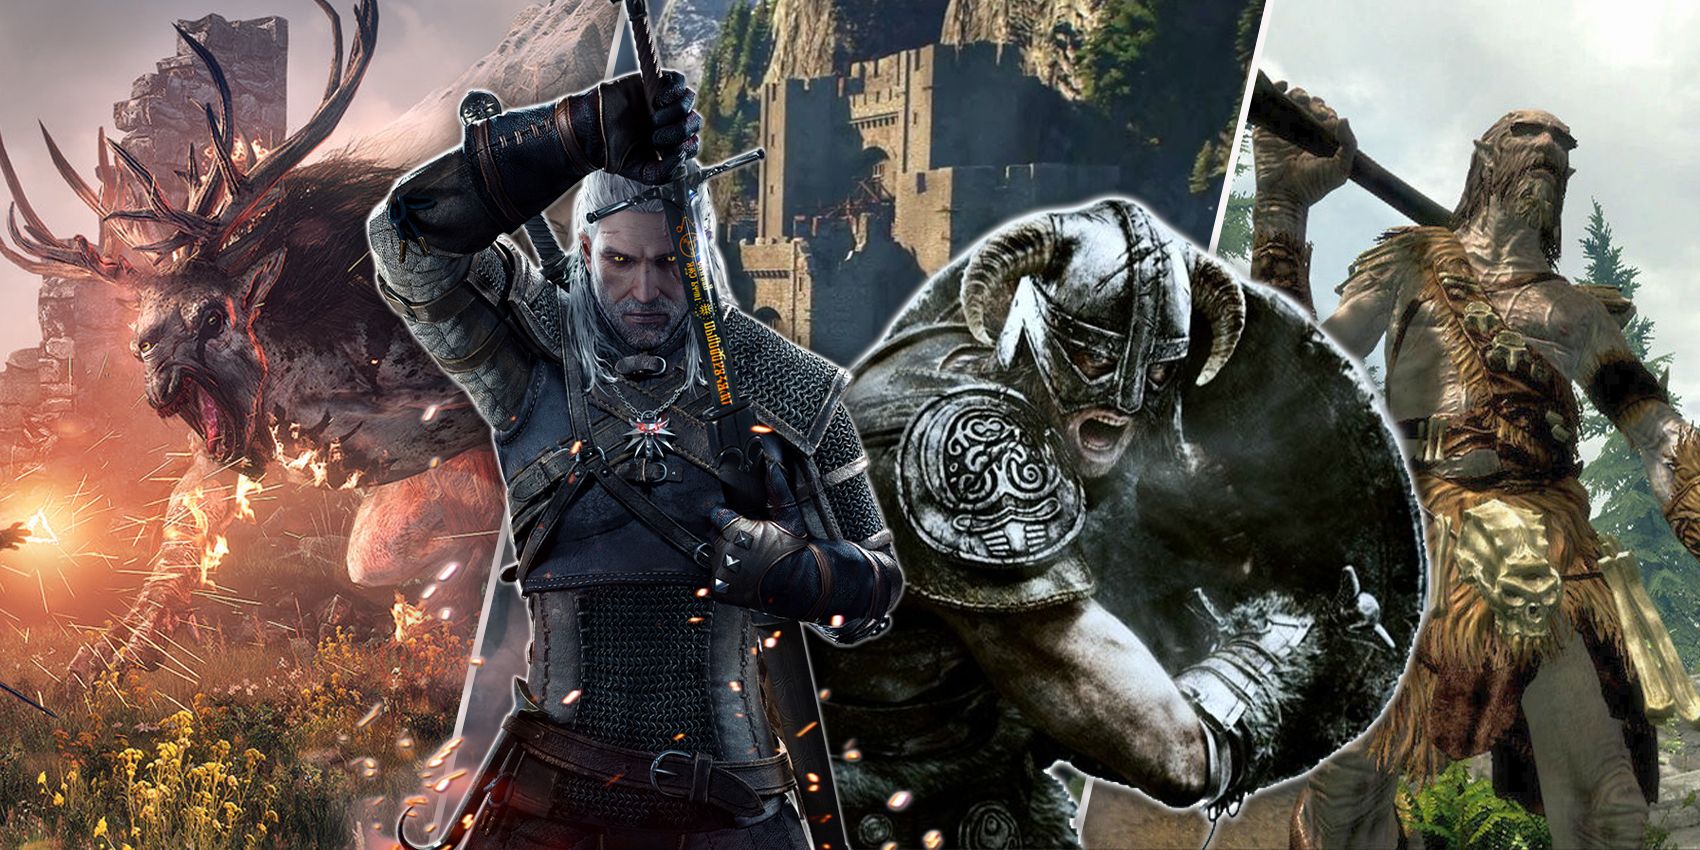 10 games like The Witcher 3 to play while you wait for The Witcher 4